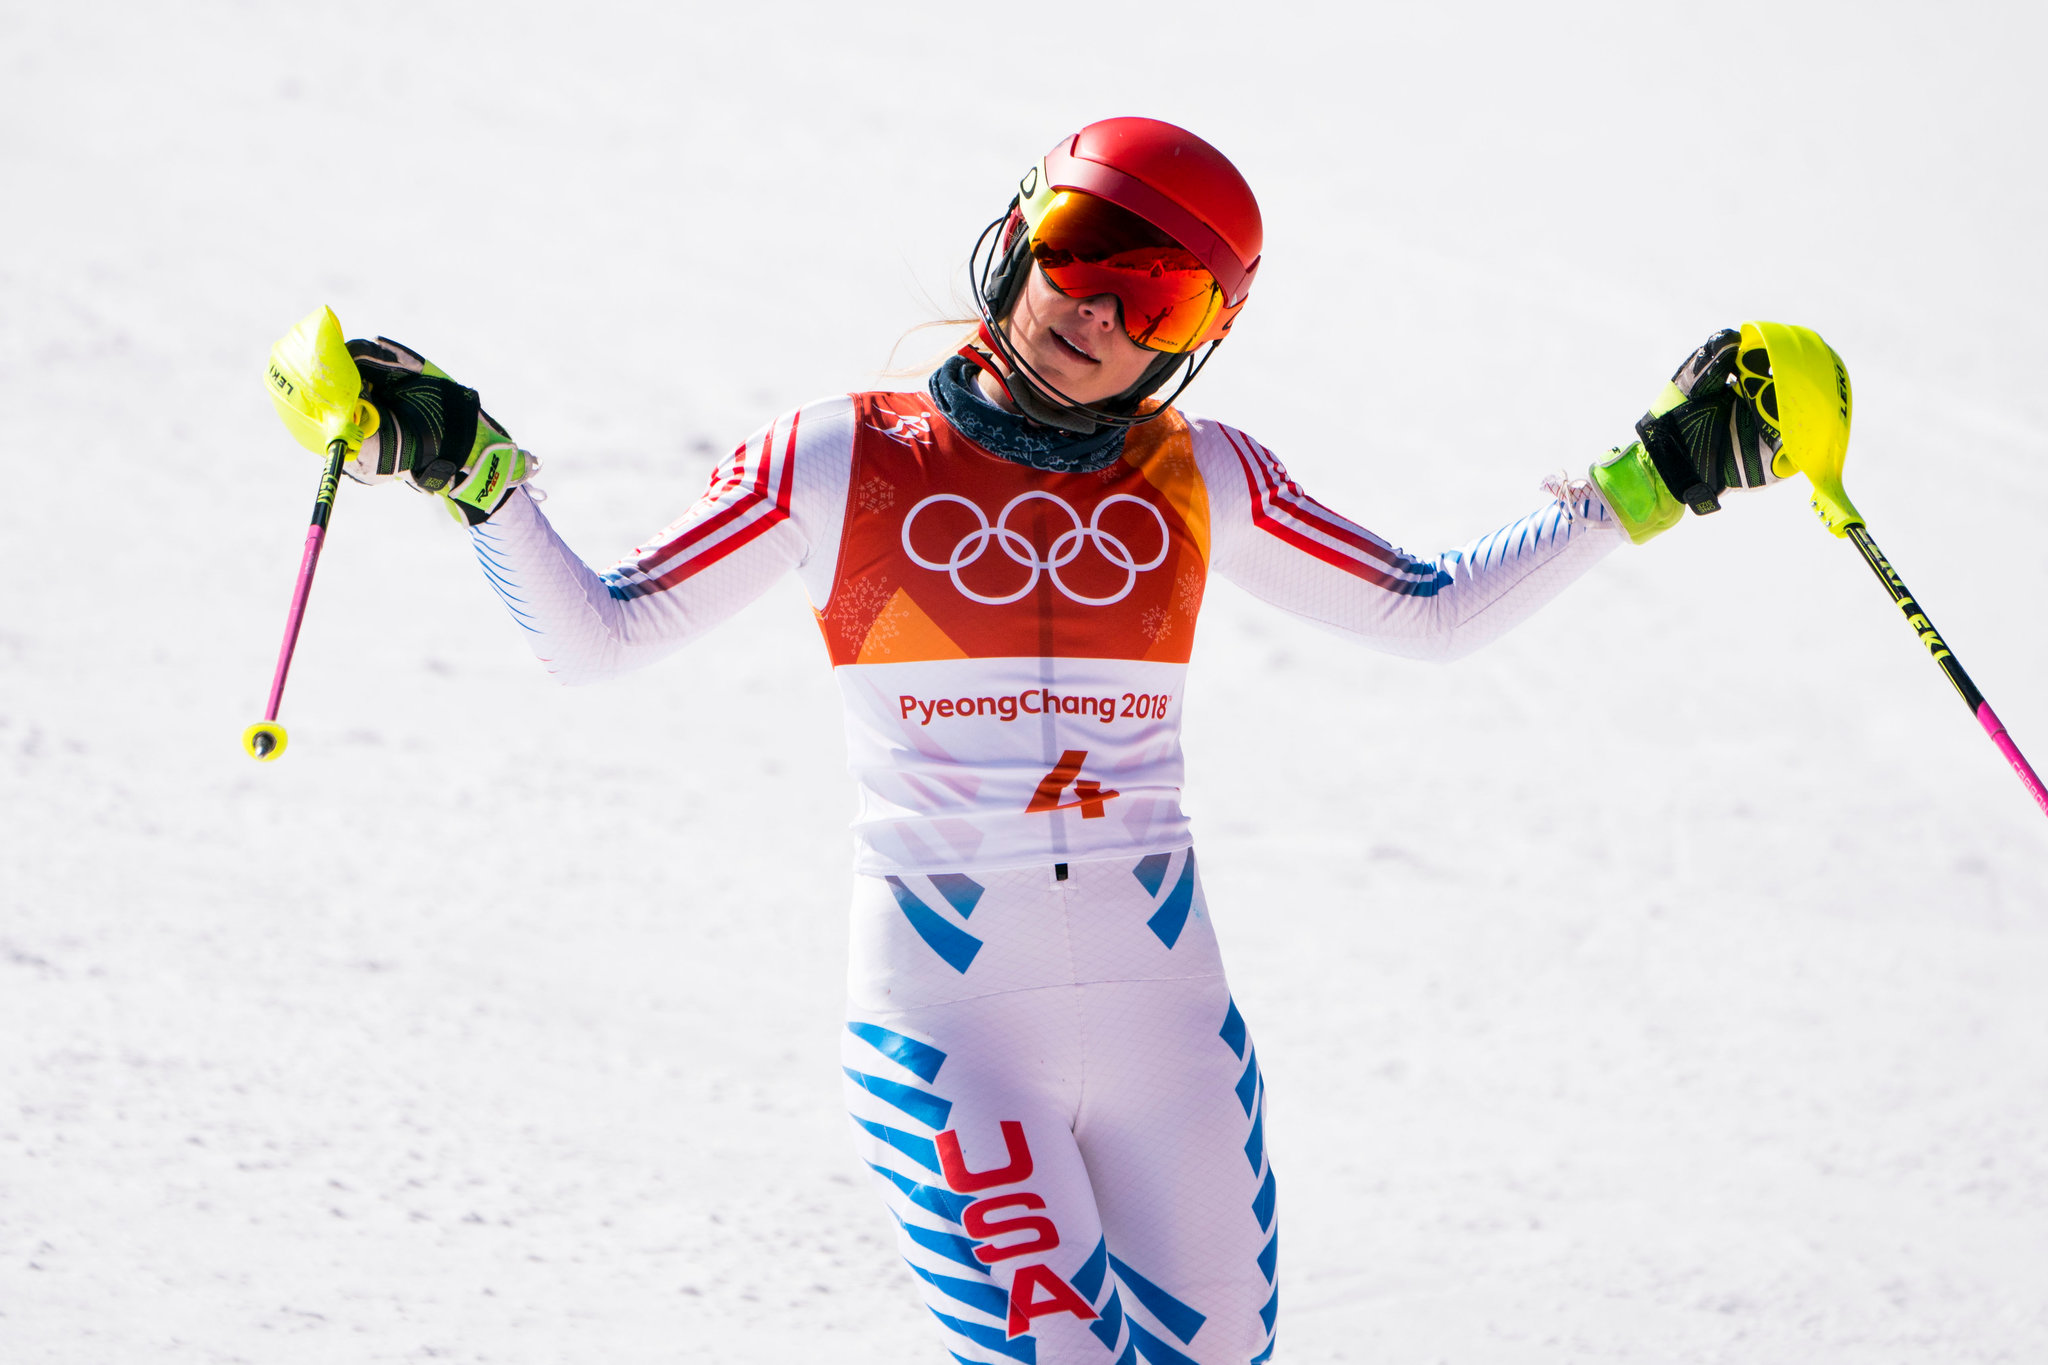 Mikaela Shiffrin makes mistakes in the last run, but manages to bag the trophy